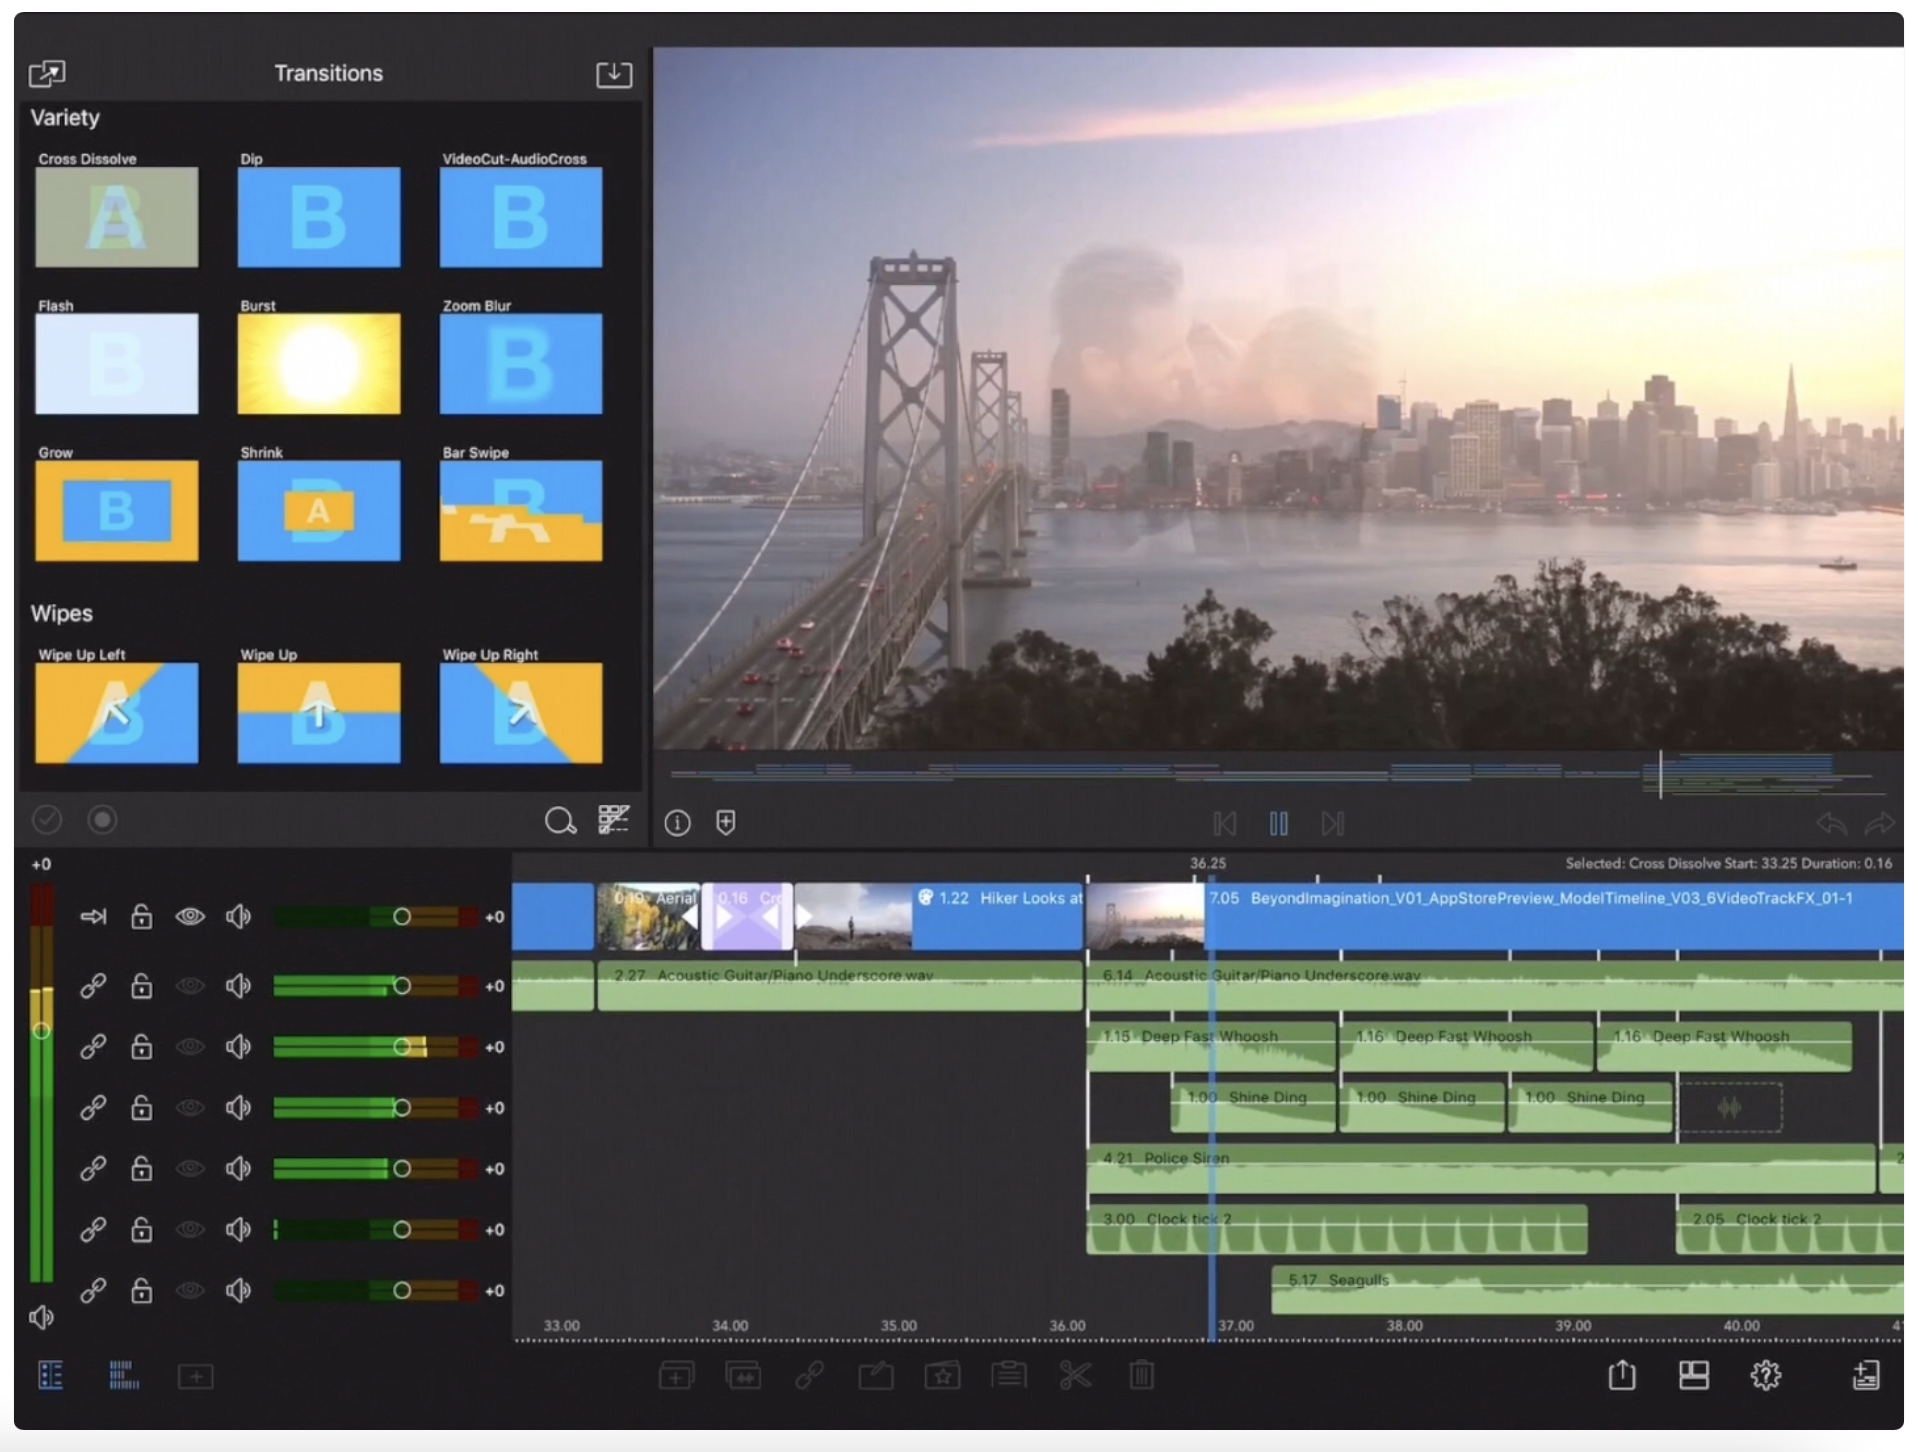 Best Video Editing Apps for iOS